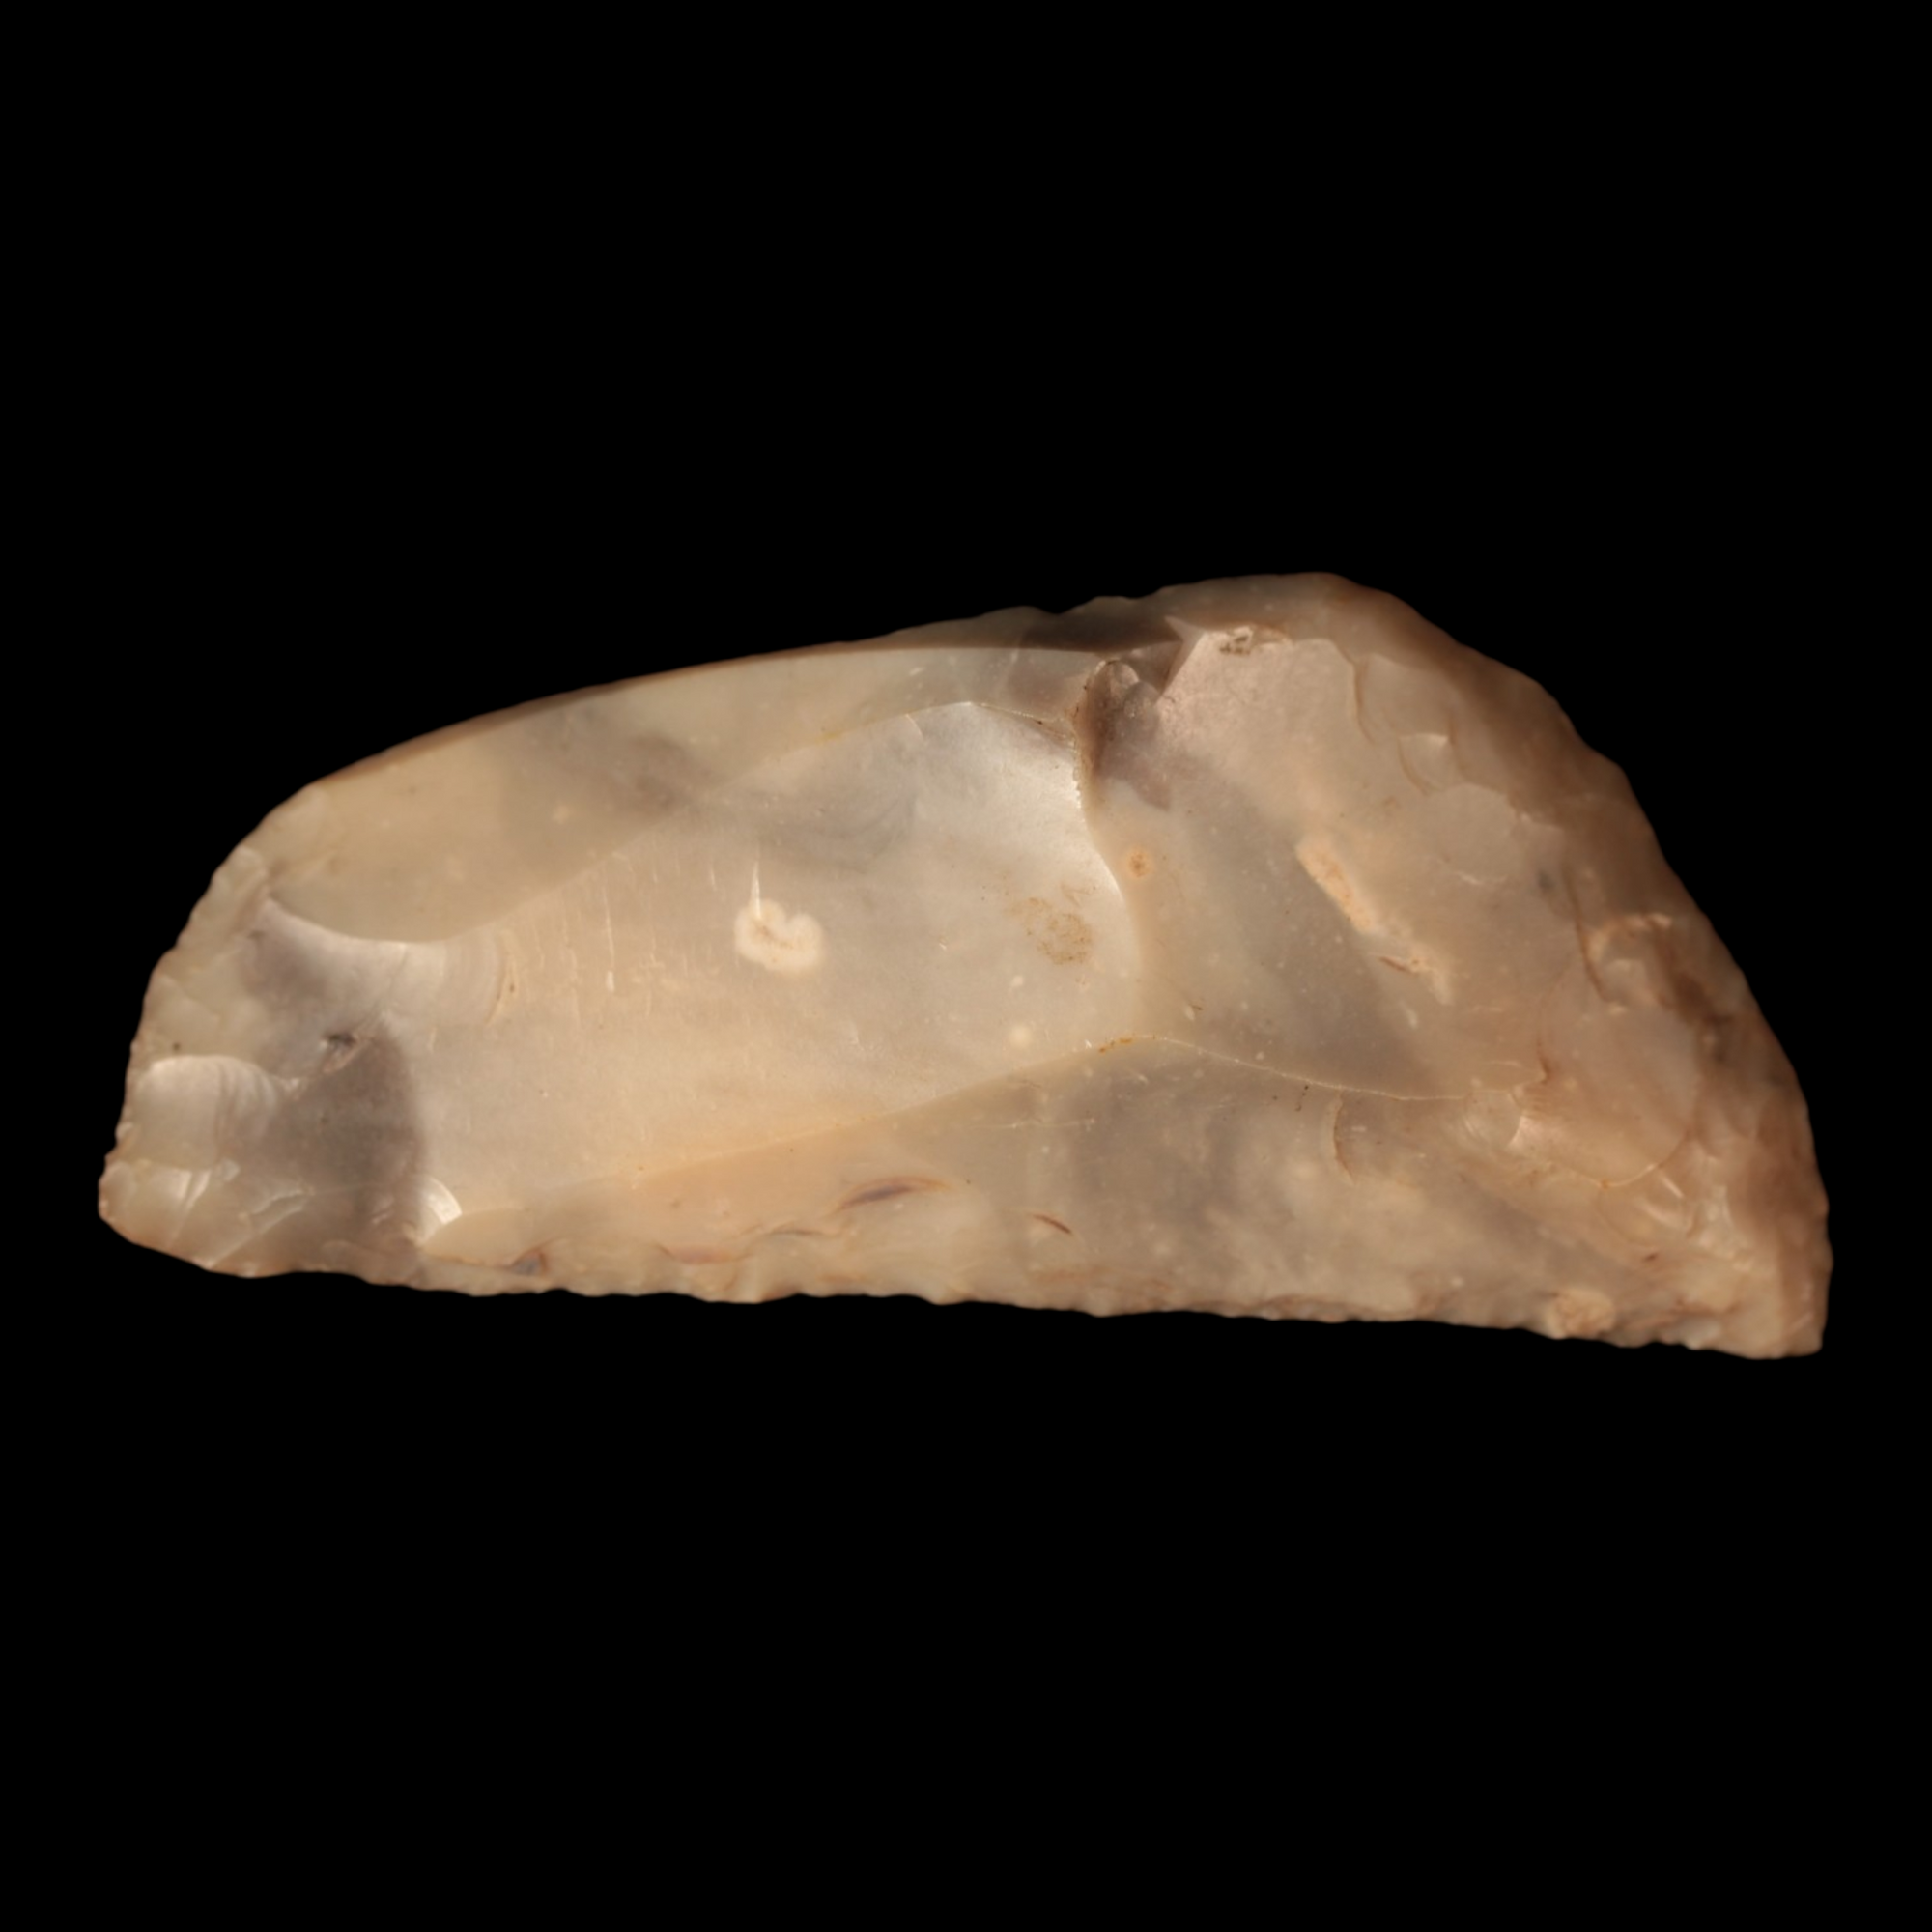 Danish Mesolithic Stone Tool #2 (2.6 inches) - c. 9000 to 5000 BCE - Denmark - 7/12/23 Auction